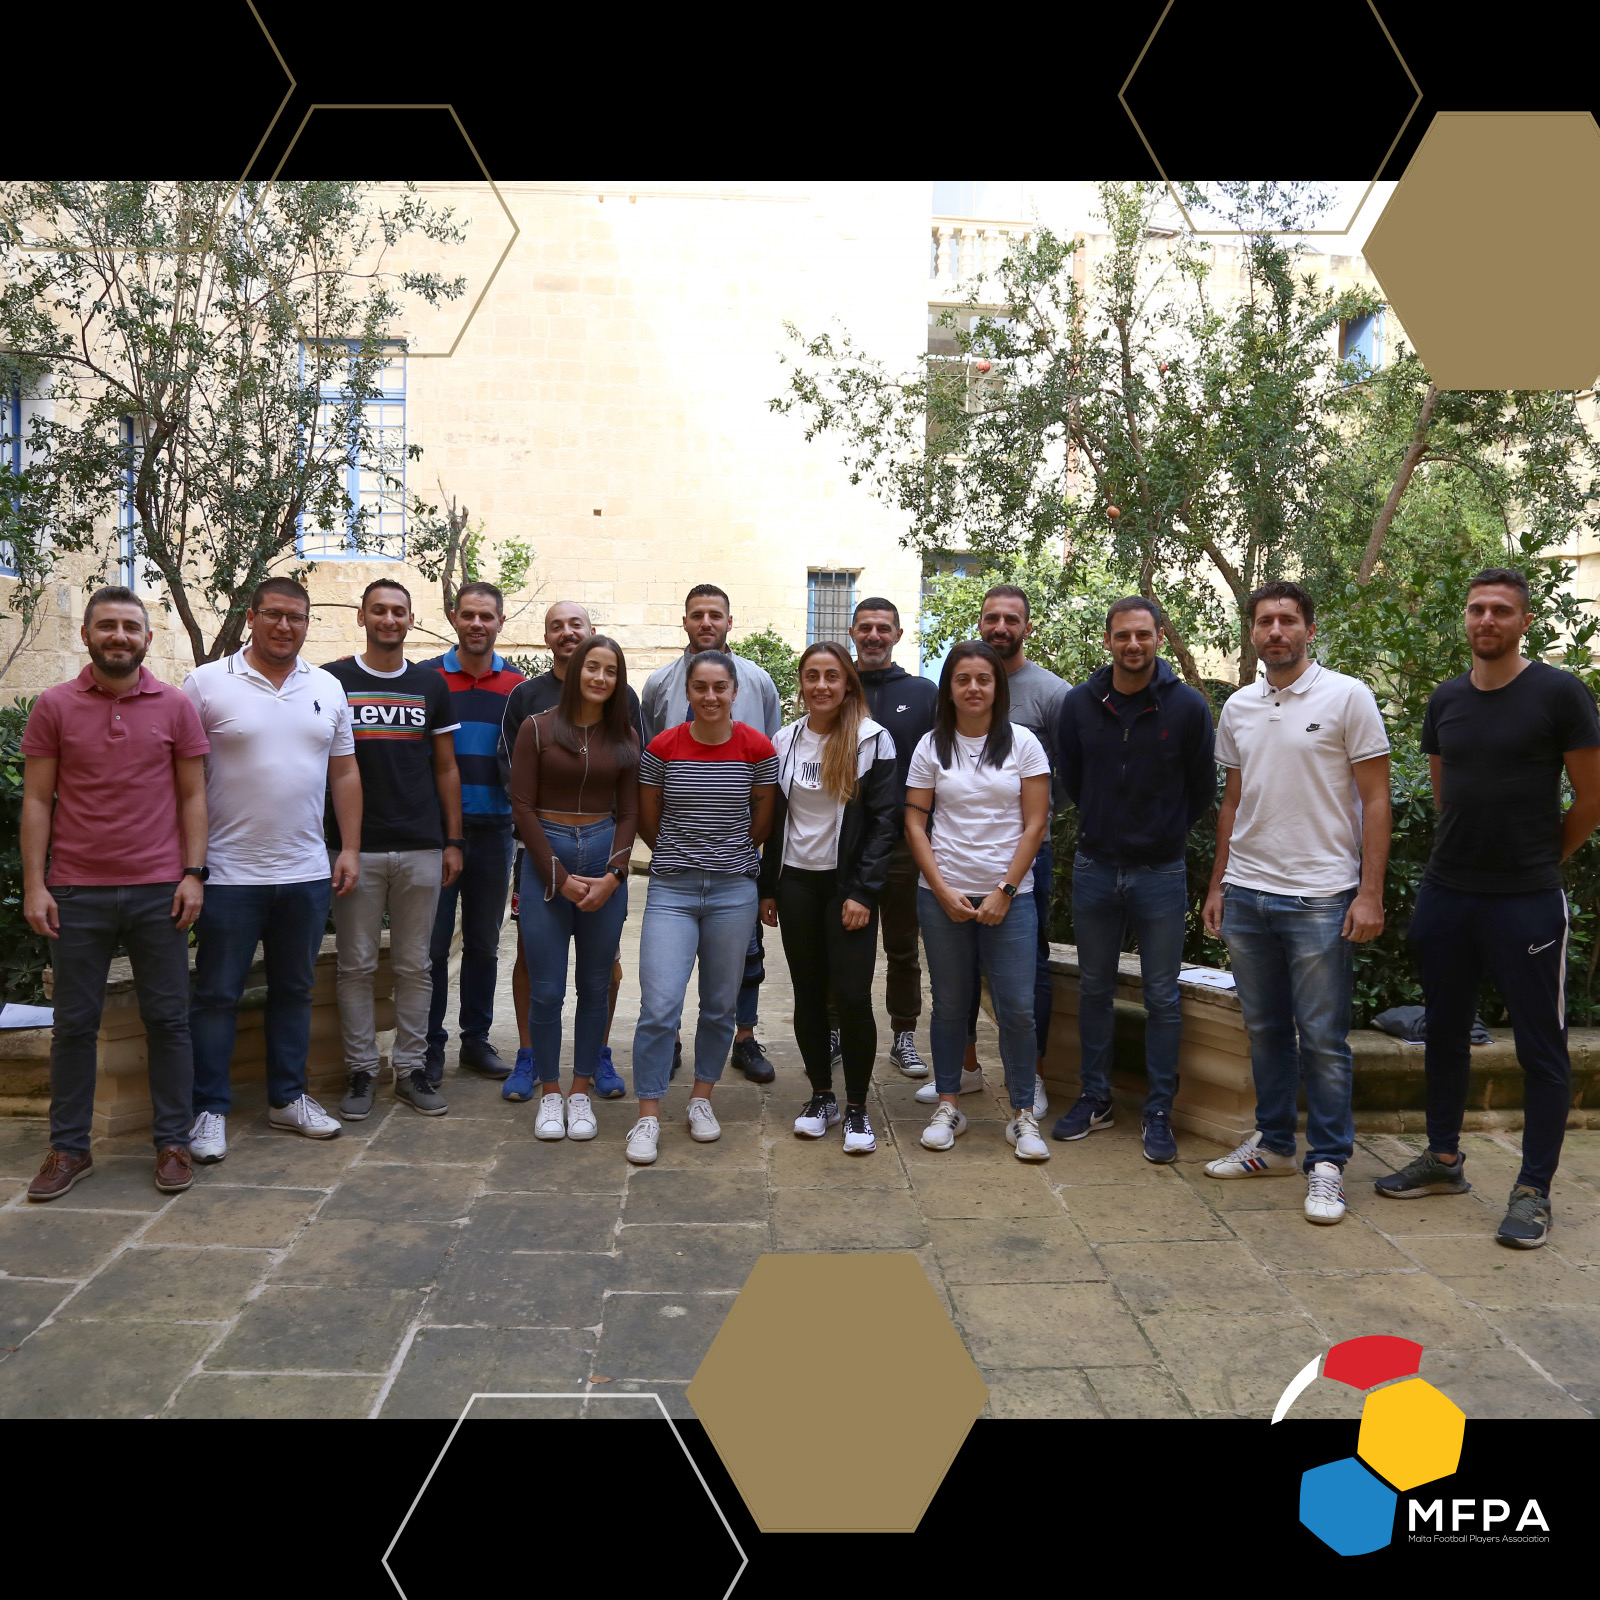 MFPA establishes Player Council to facilitate discussion on key football matters